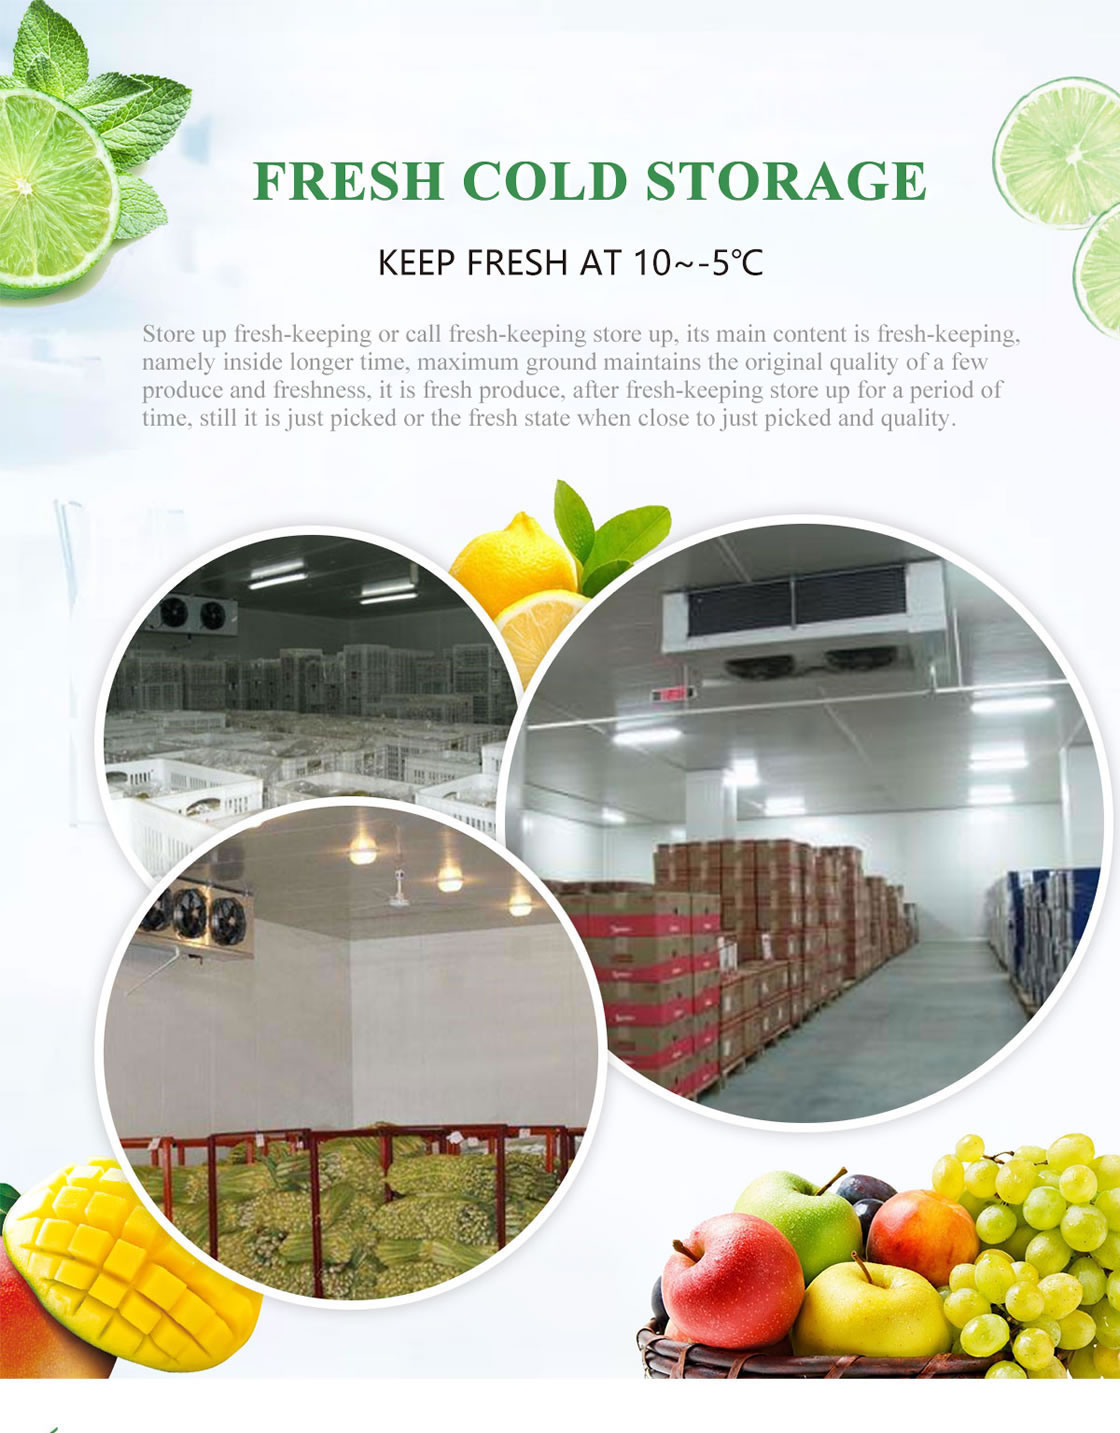 FRUIT AND VEGETABLE COLD ROOMS